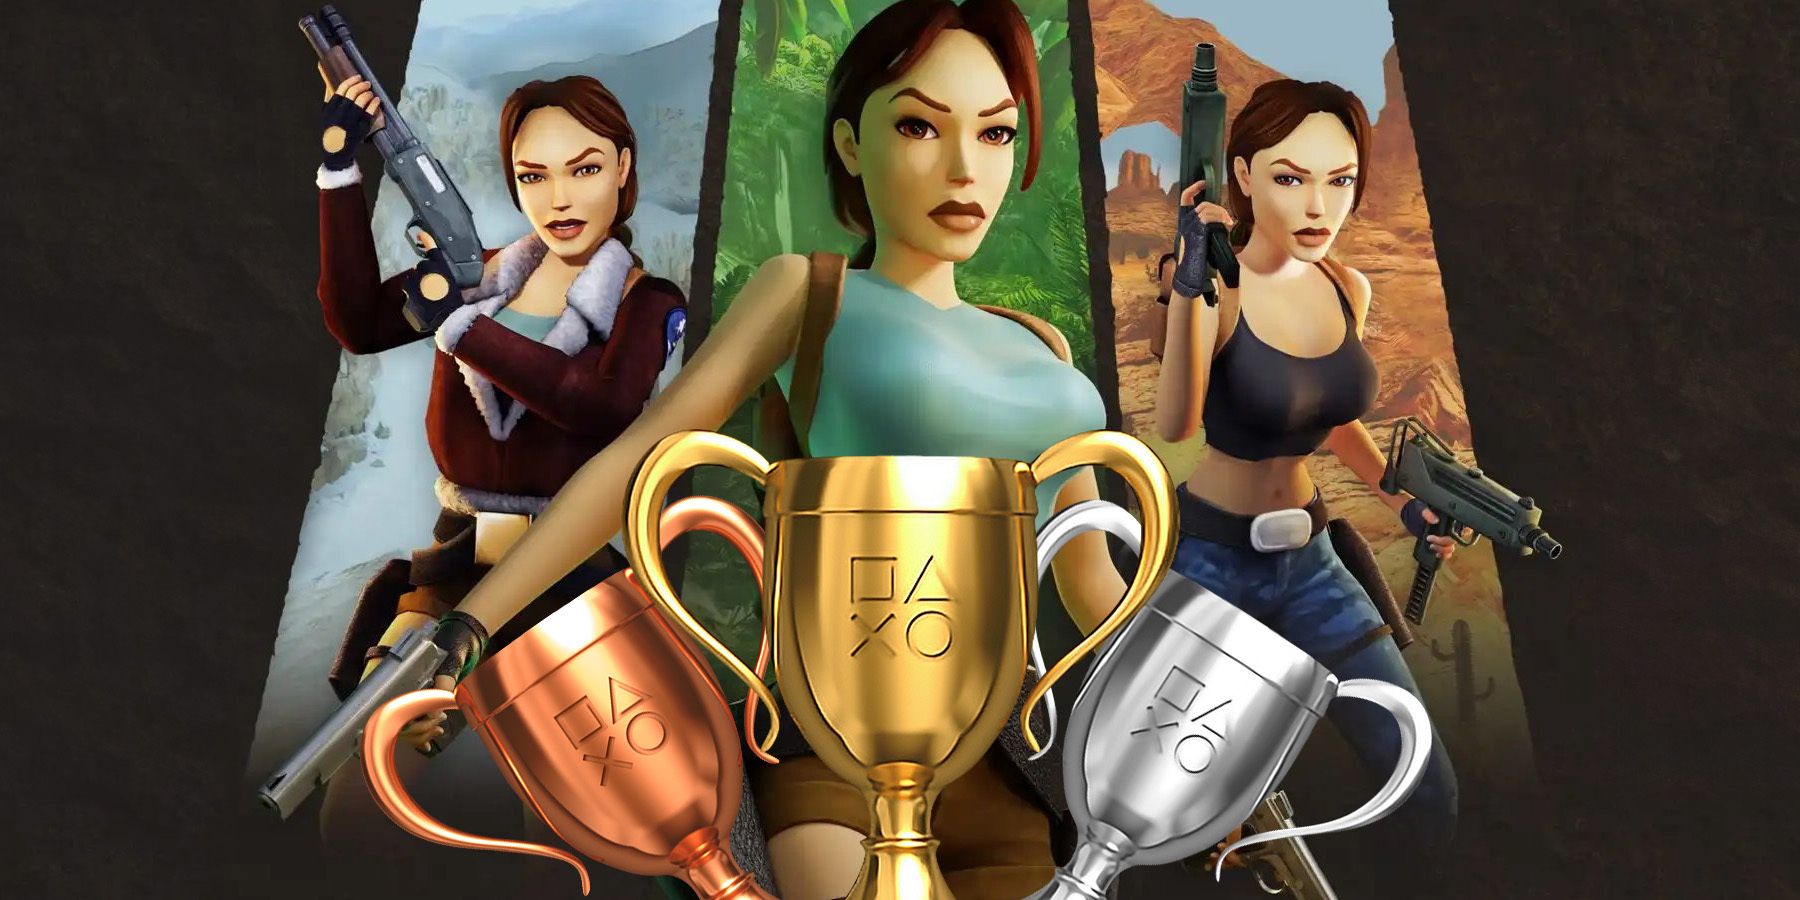 tomb raider 1-2-3 remastered playstation trophies